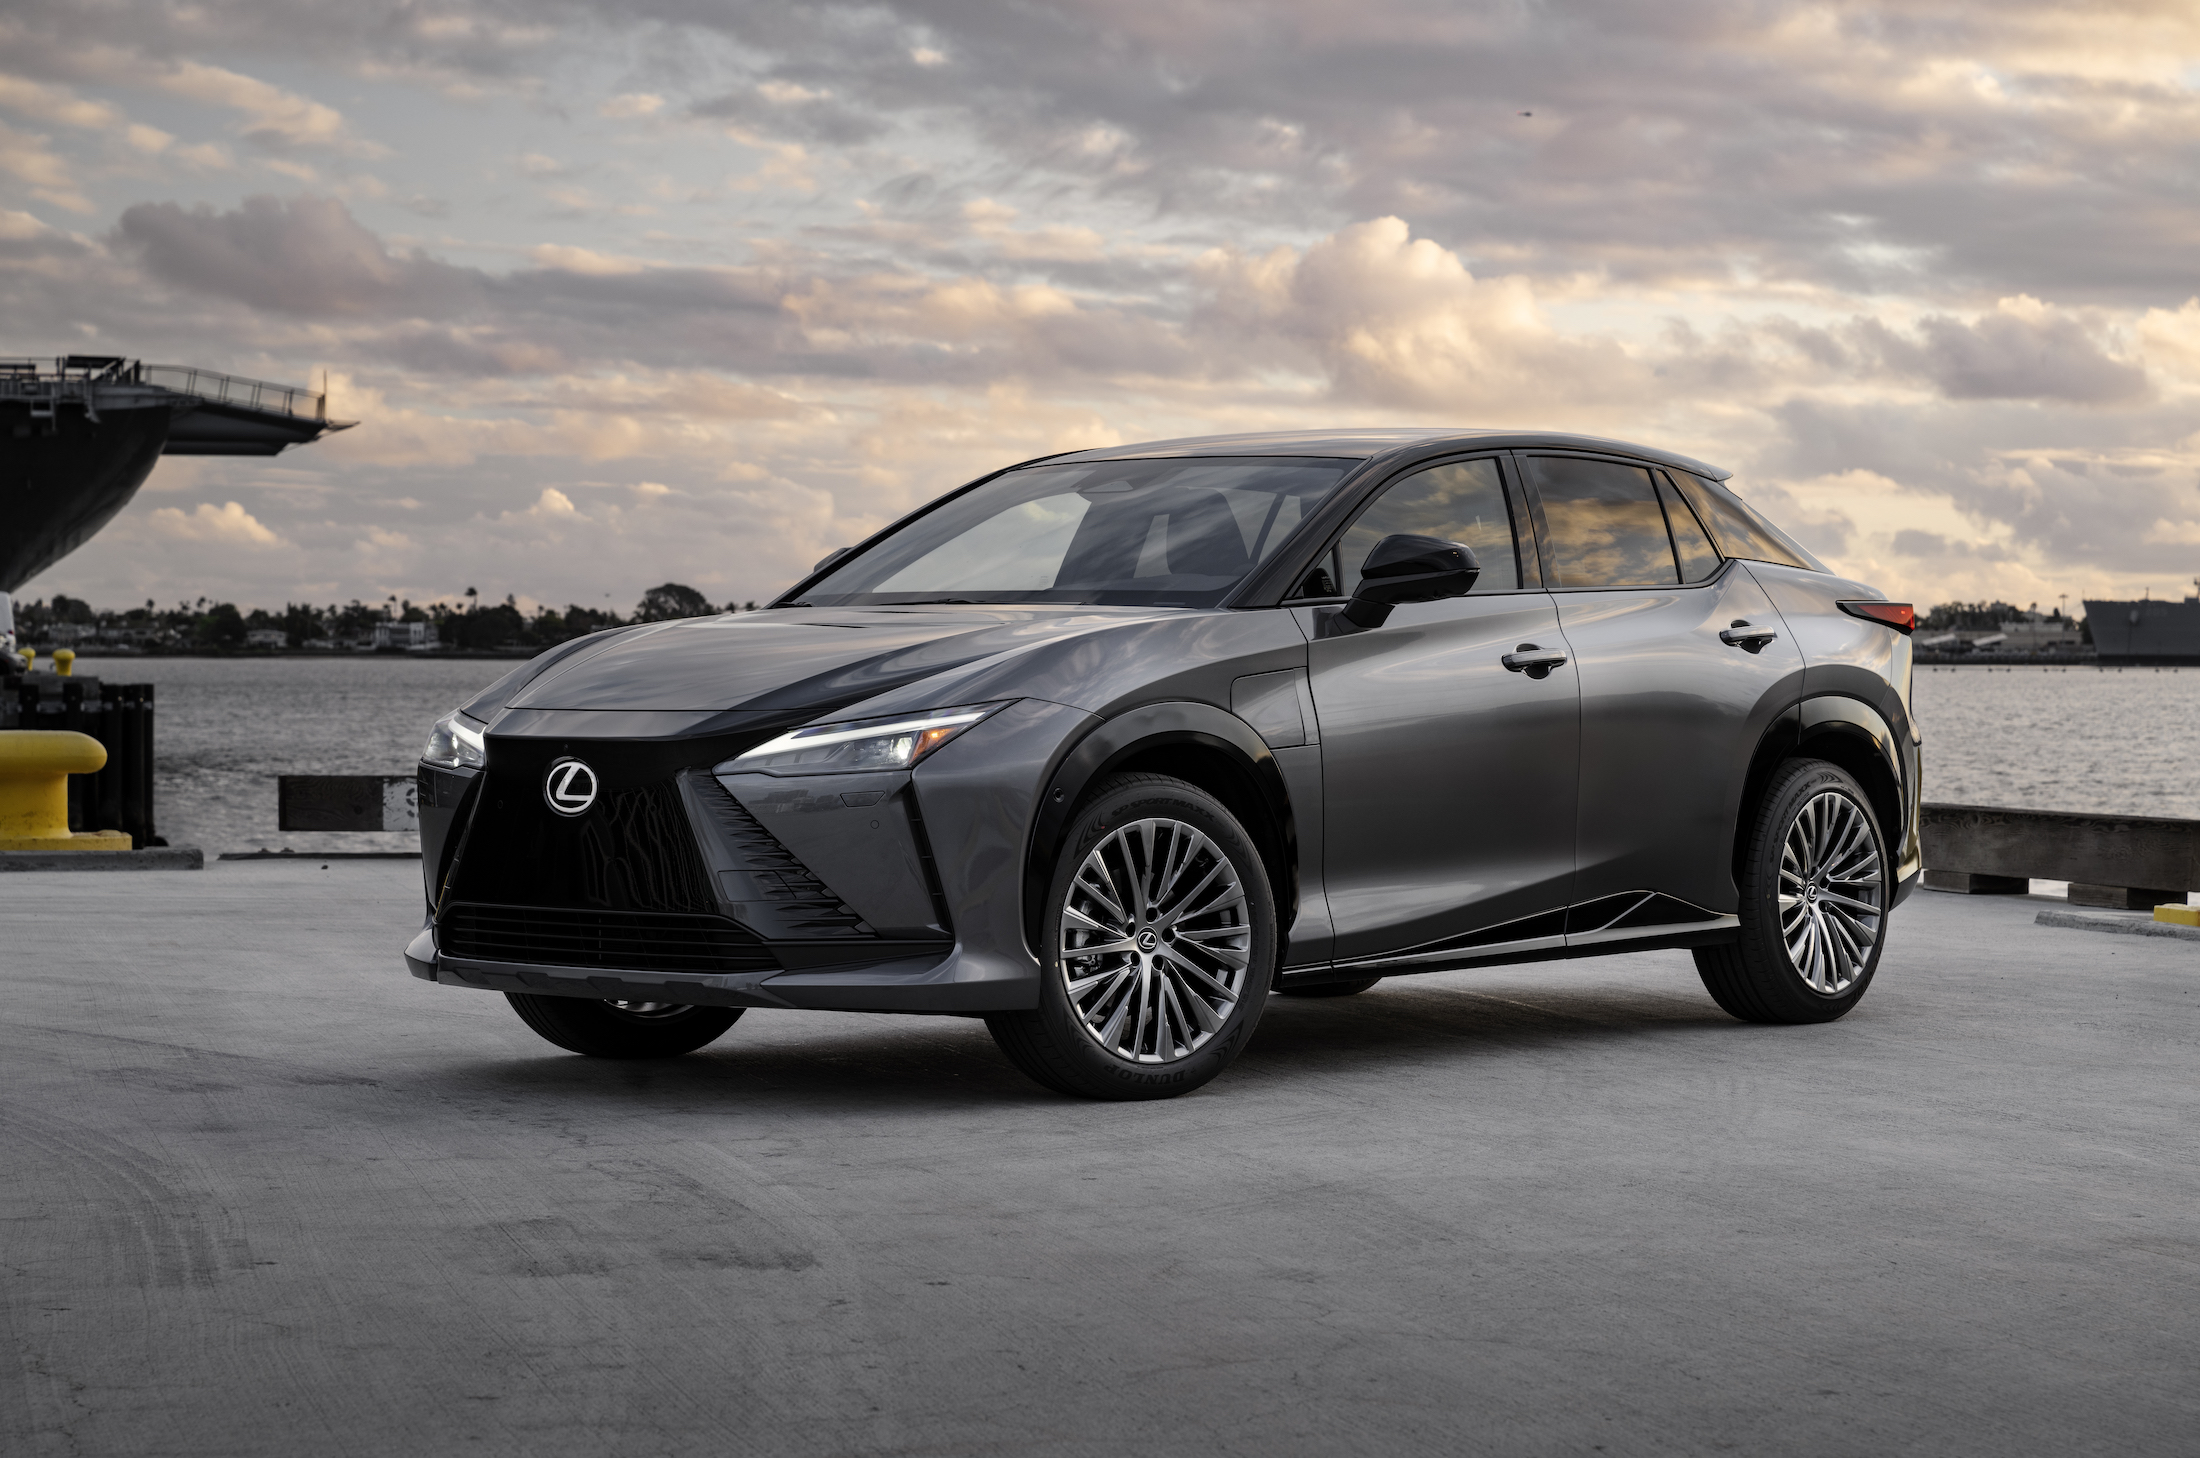 2024 Lexus RX Prices, Reviews, and Photos - MotorTrend